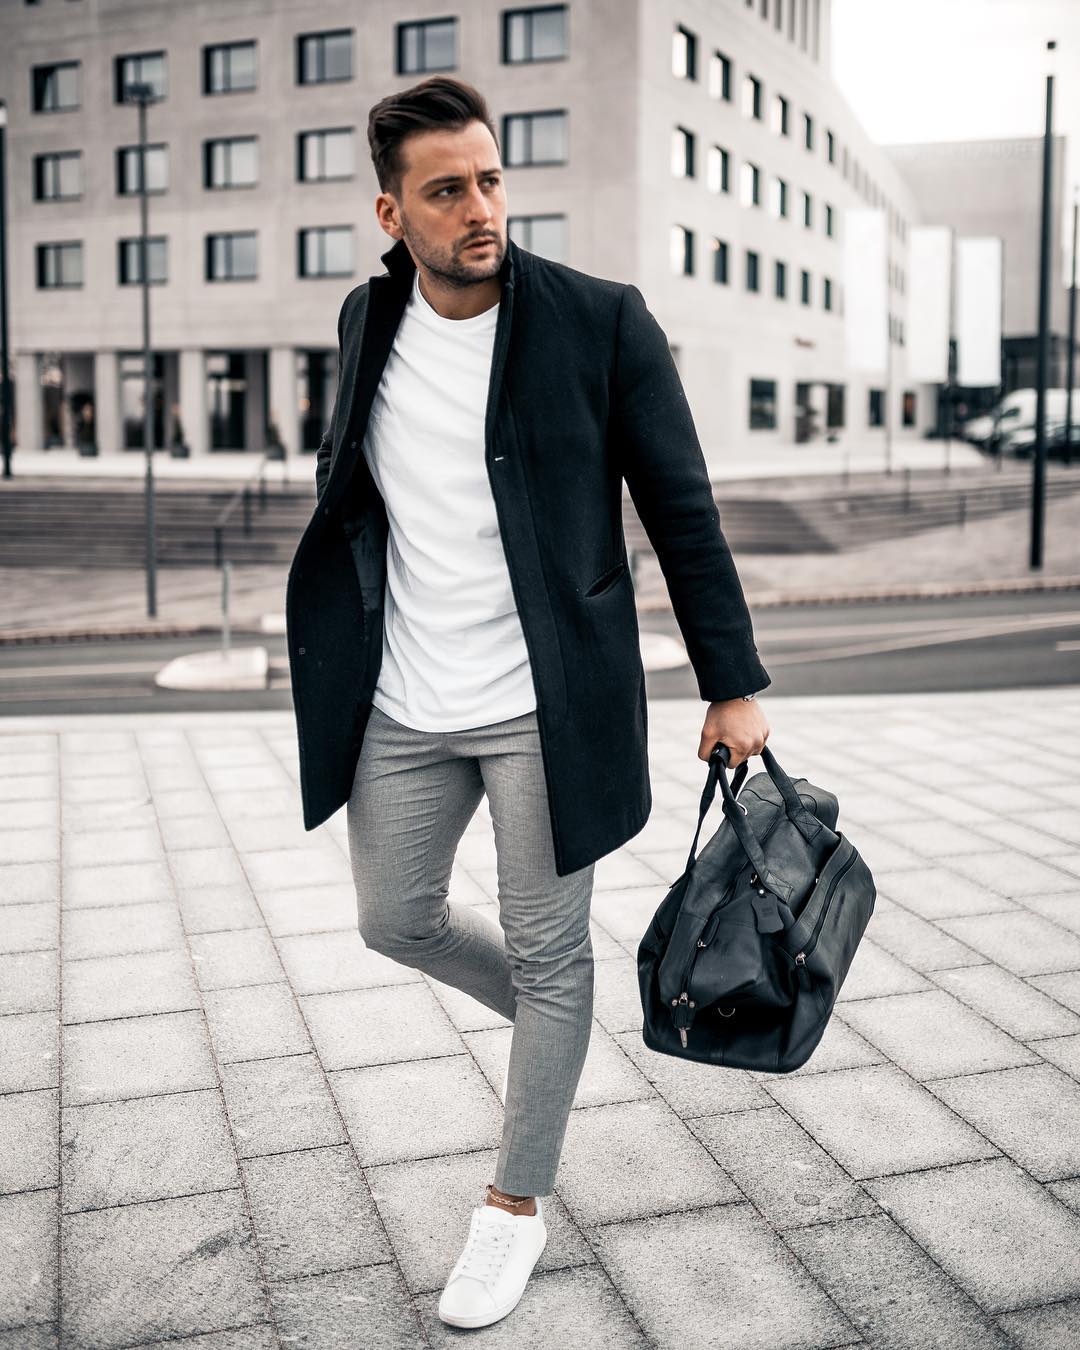 5 Coolest Outfits You Can Steal To Look Great #streetstyle #mensfashion